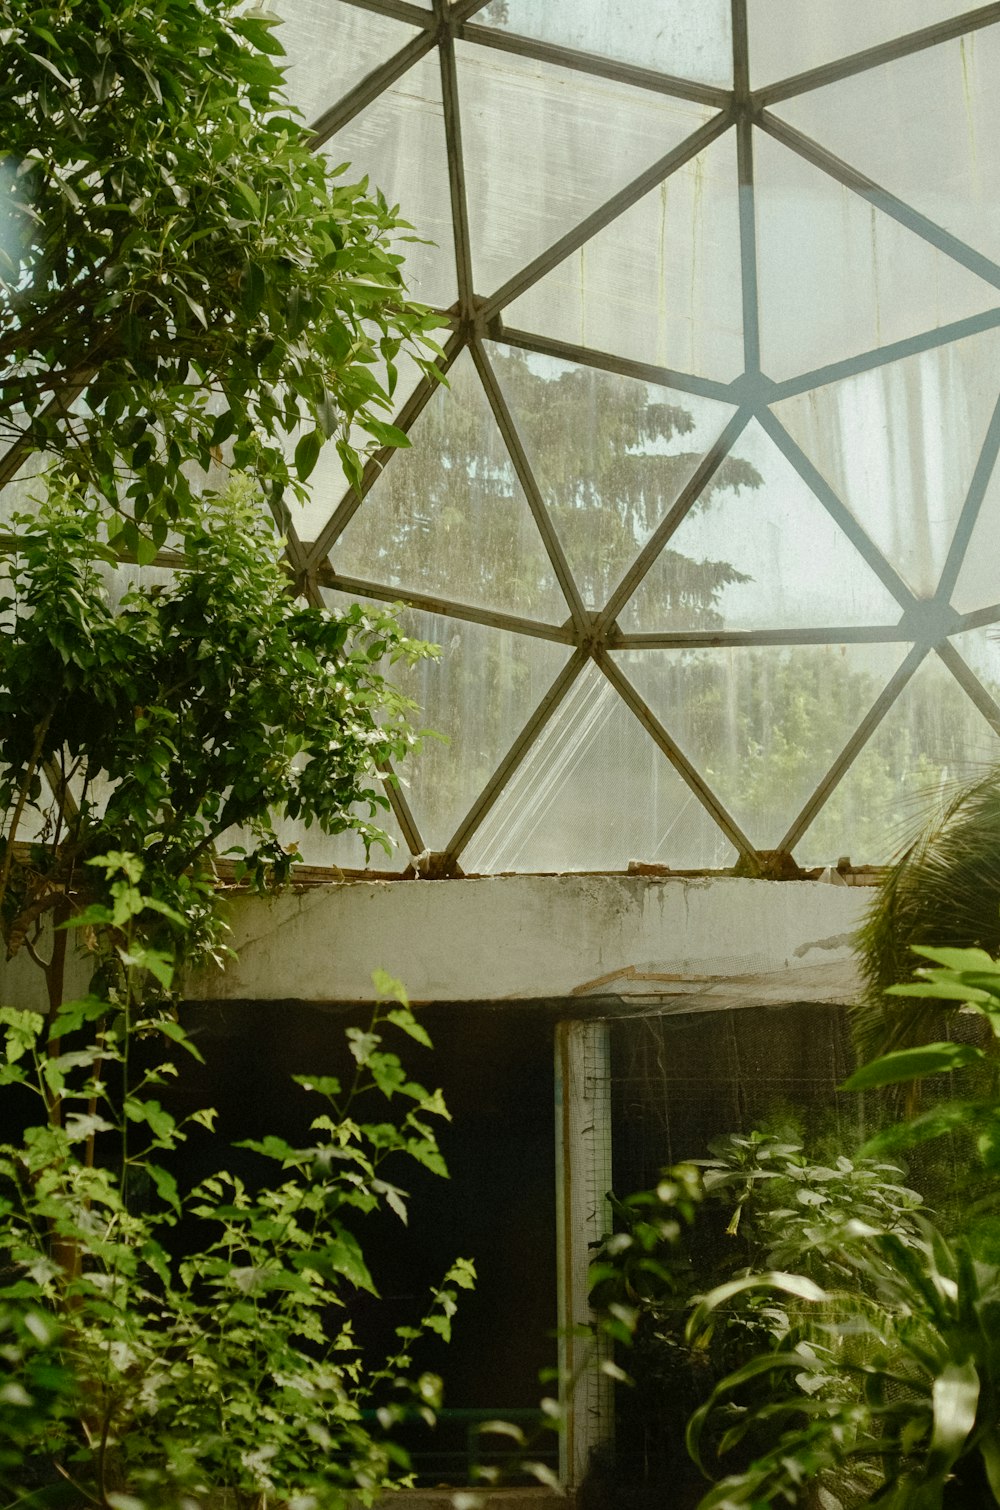 a view of the inside of a greenhouse